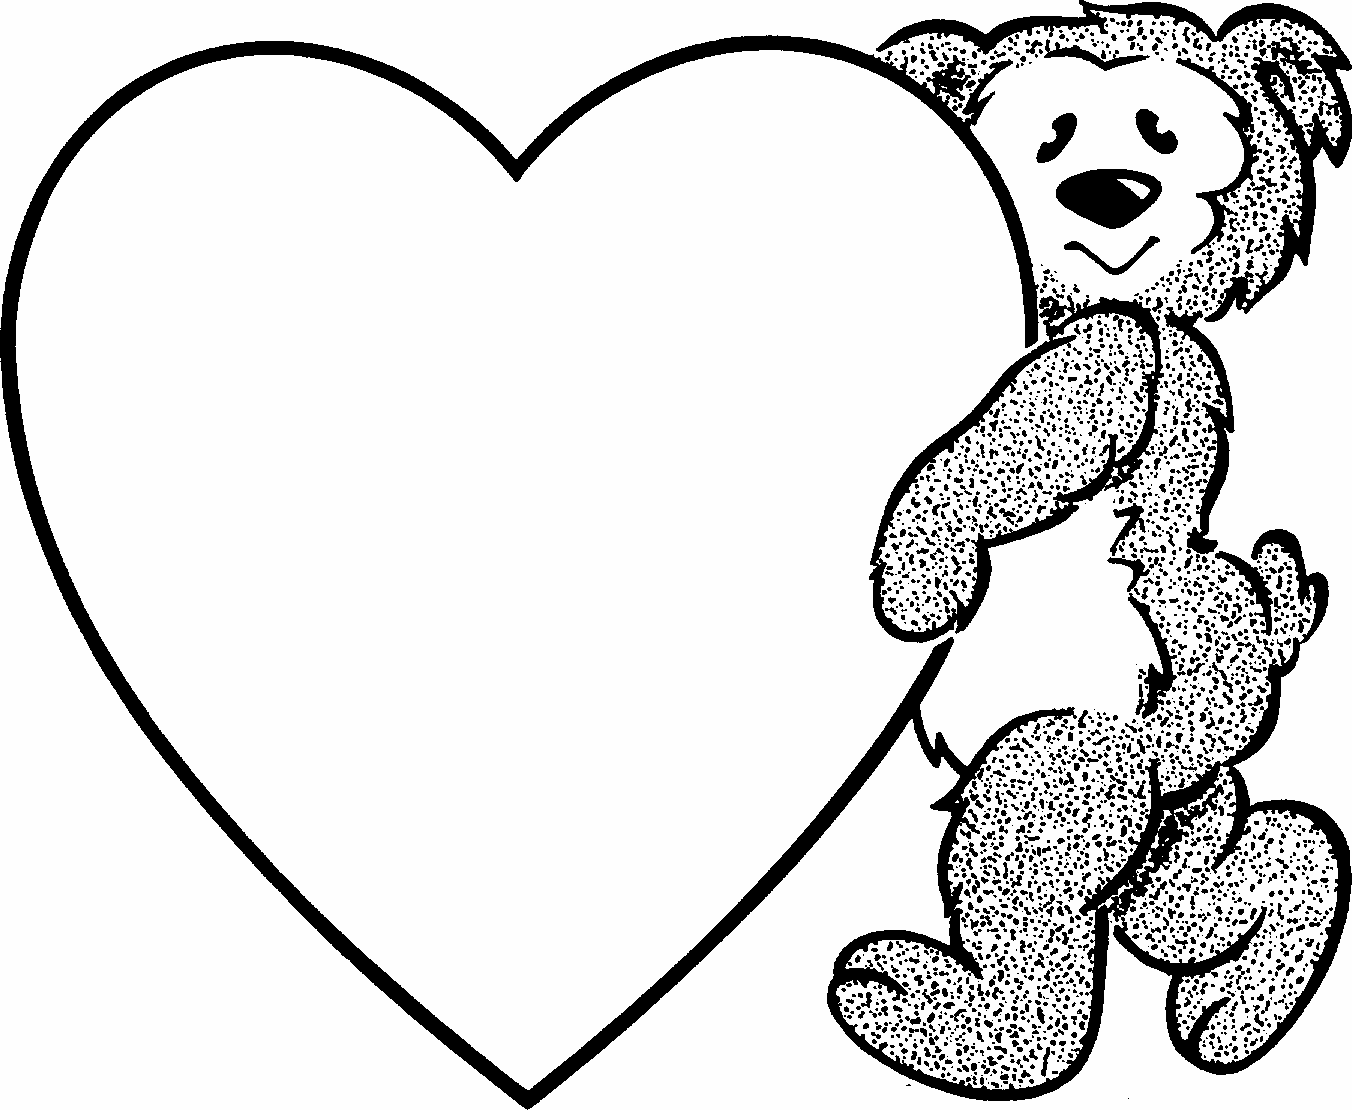 Heart clipart free clipart